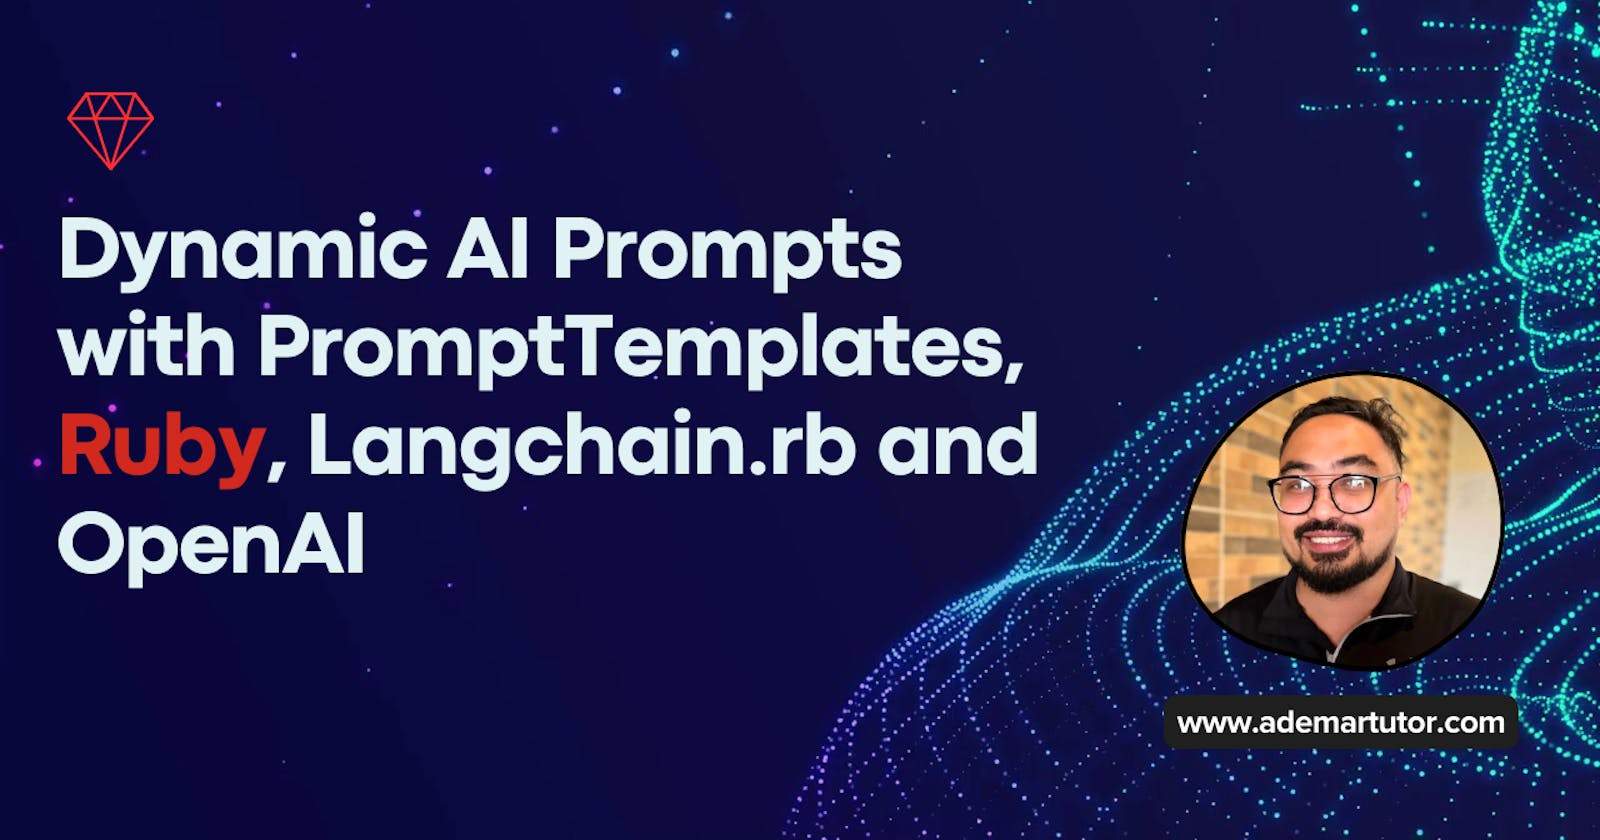 Dynamic AI Prompts with PromptTemplates, Ruby, Langchain.rb and OpenAI